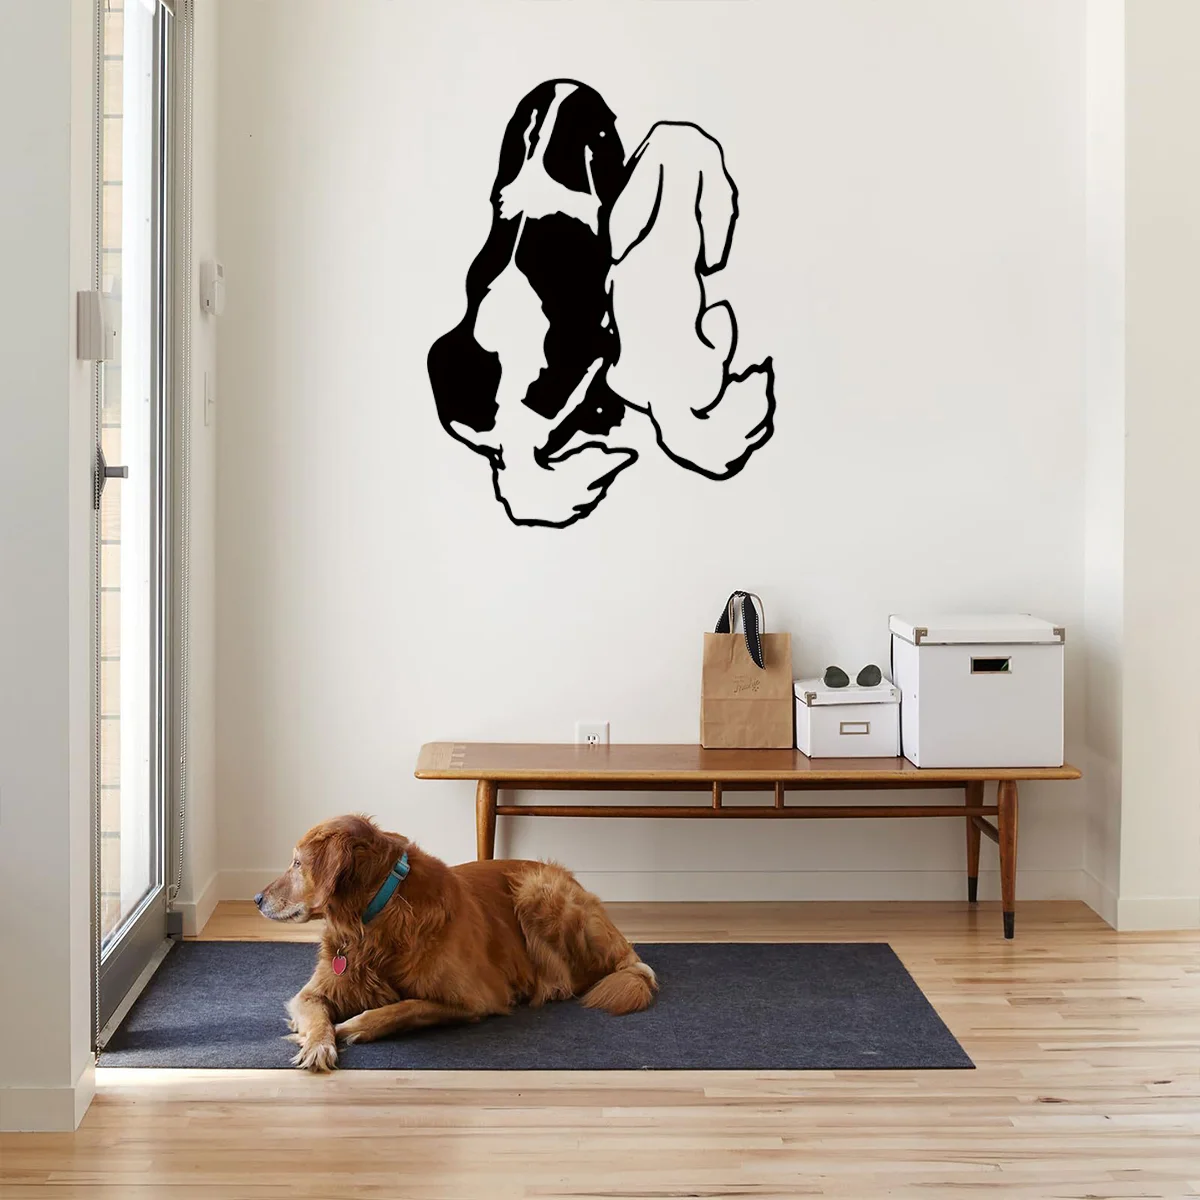 

Cute Dog Metal Wall Hanging Art Iron Art Silhouette Animal Minimalist Abstract Line Home Decor Create A Warm Atmosphere for Home